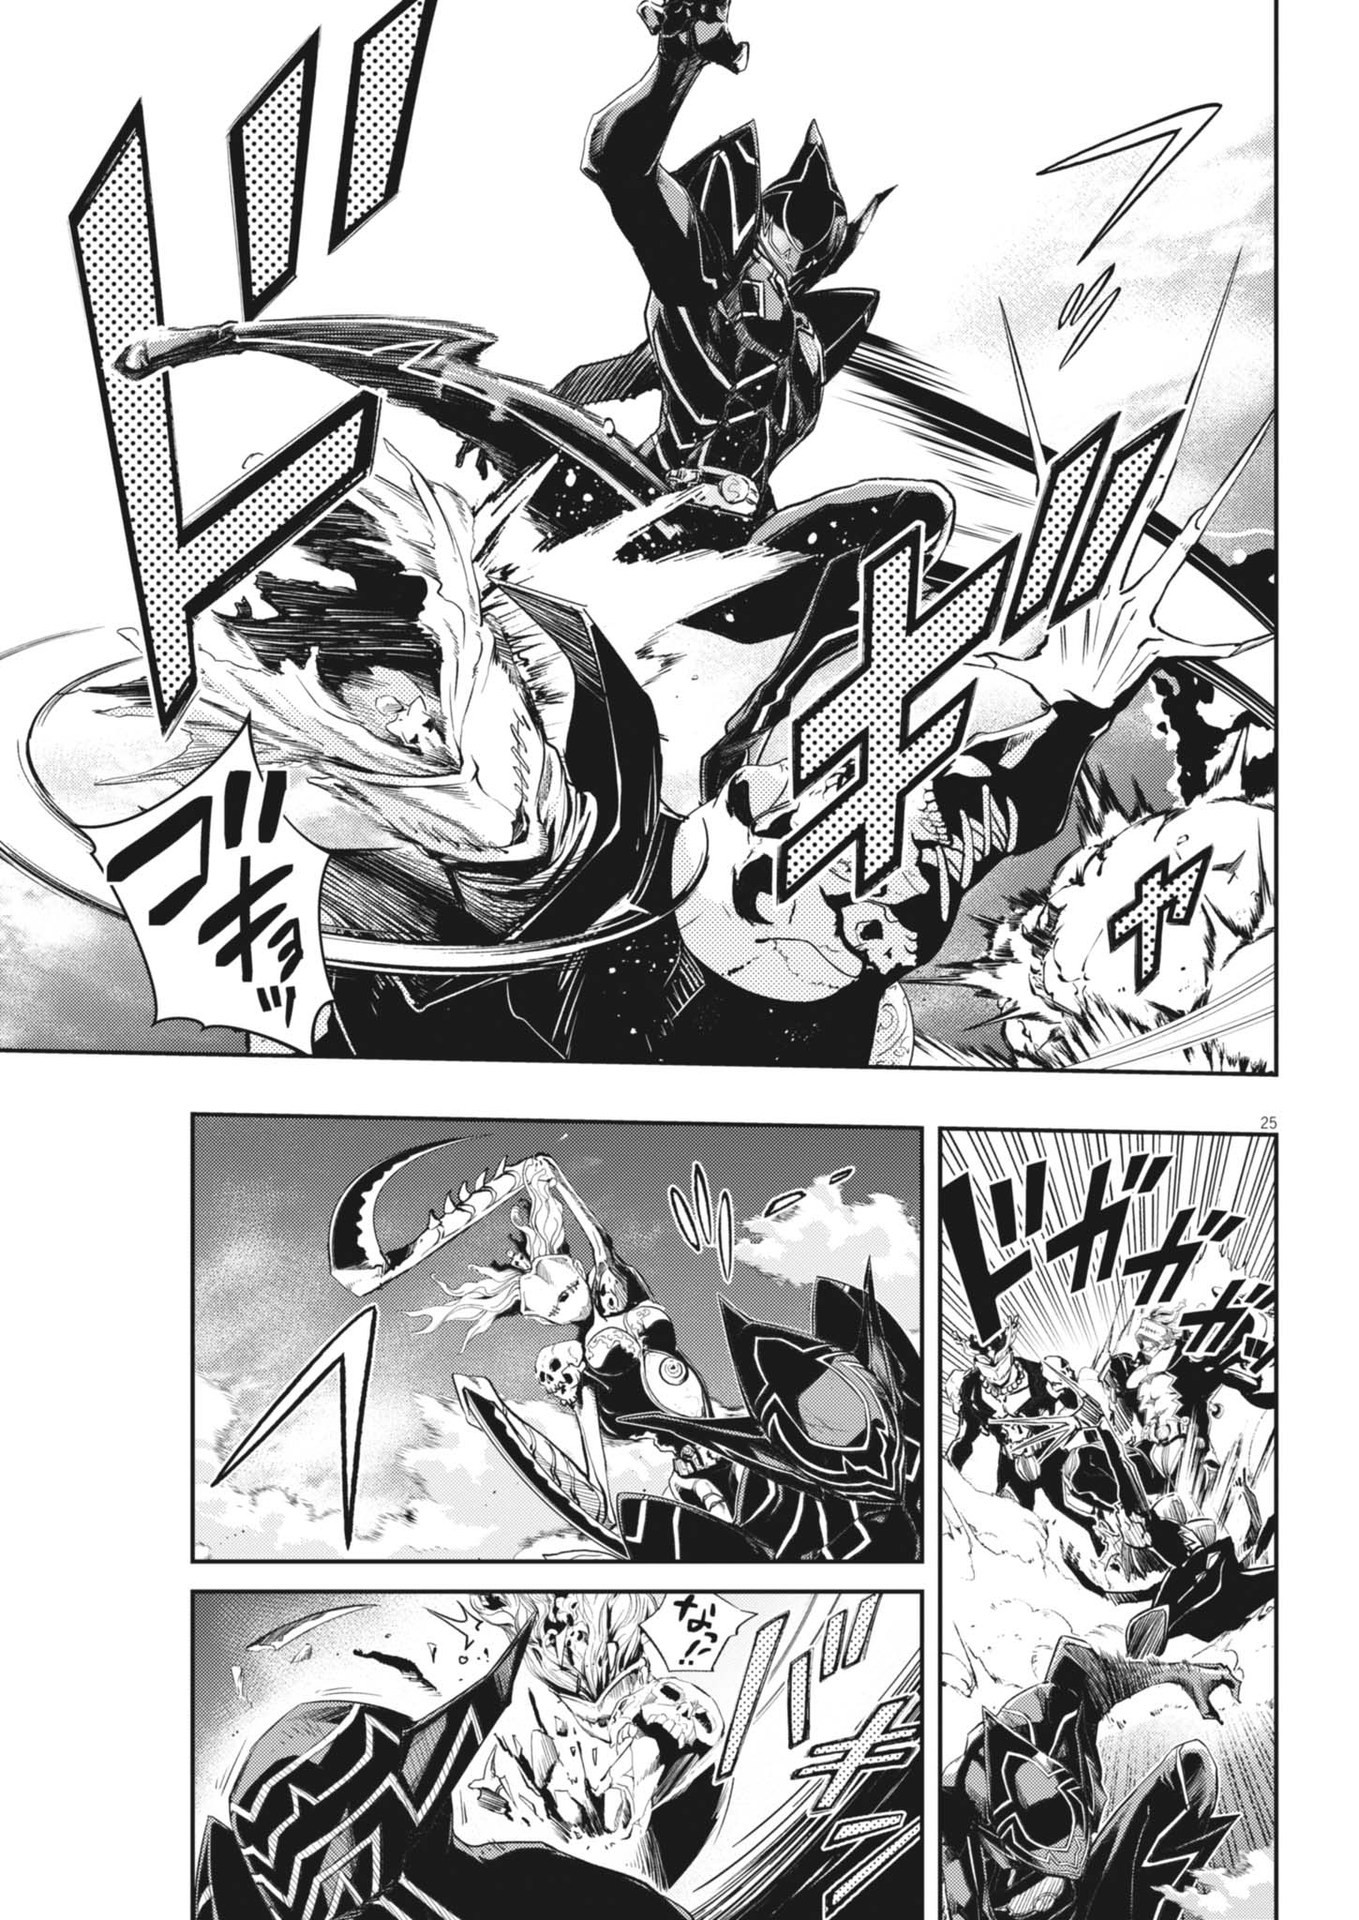 Kamen Rider W: Fuuto Tantei - Chapter 148 - Page 26